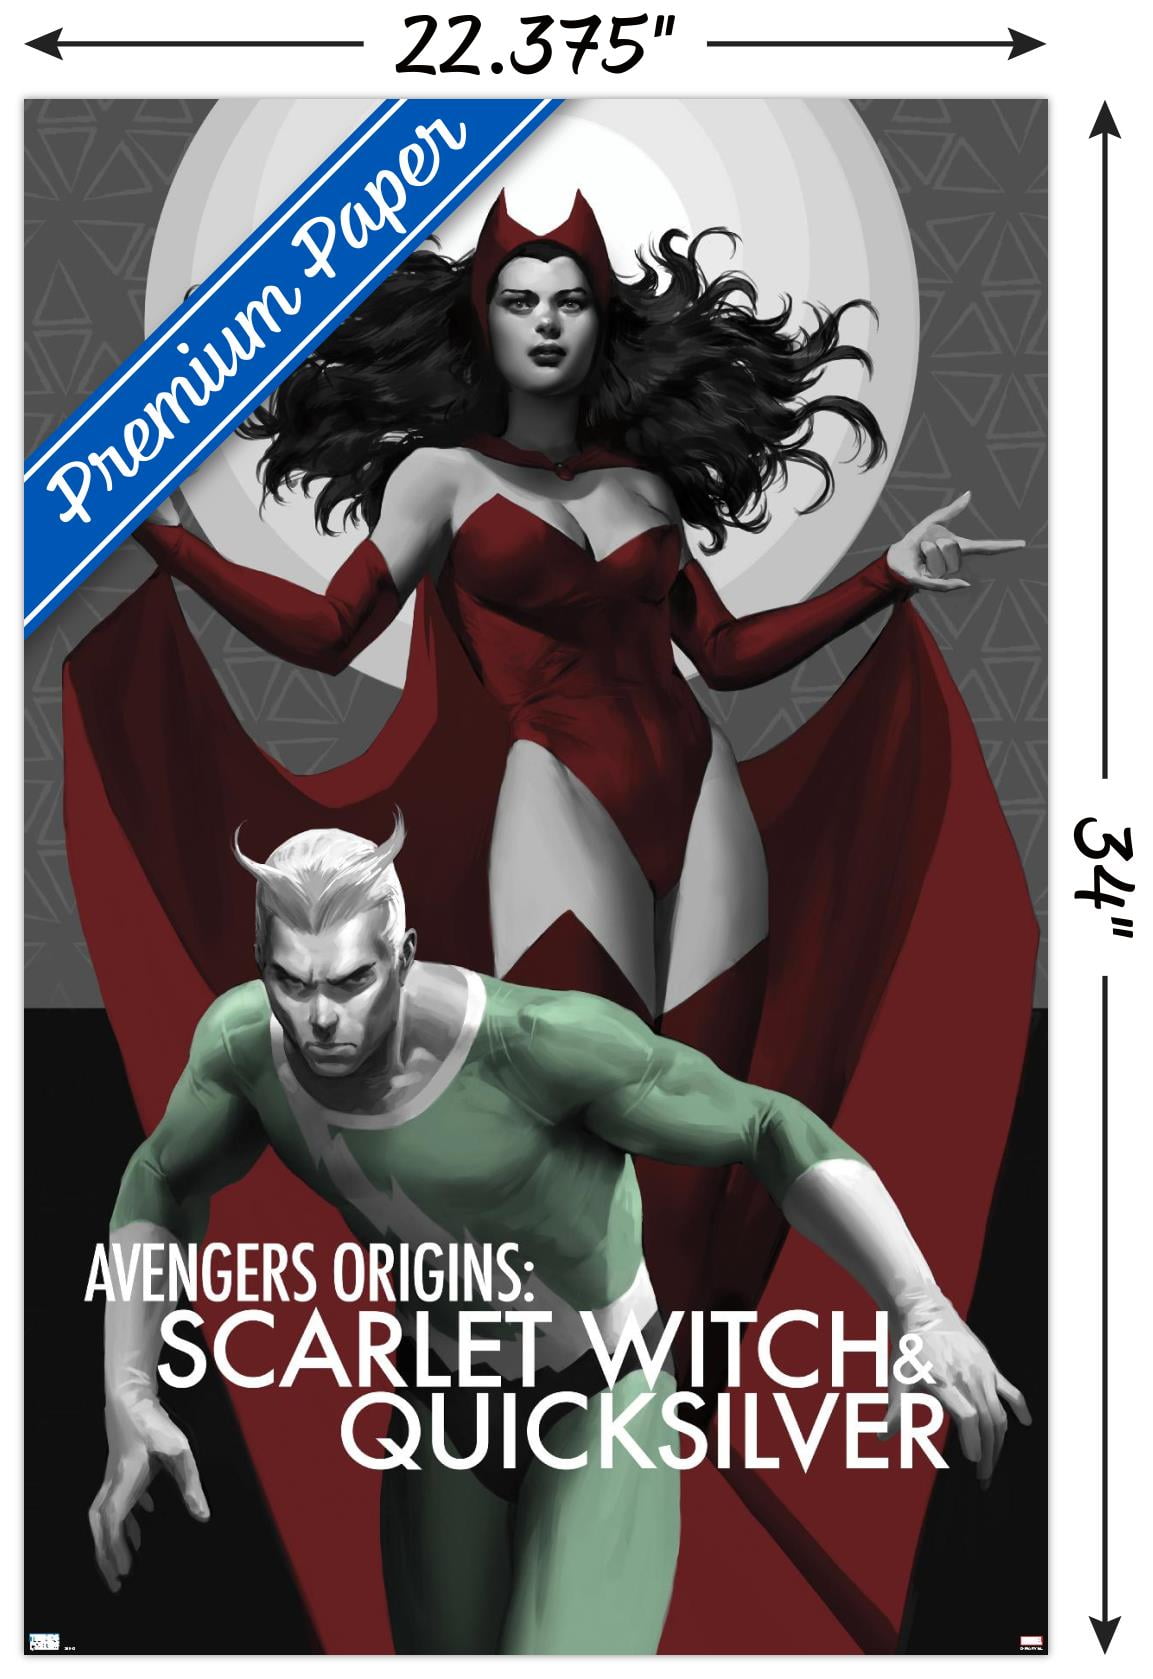 Avengers Origin: Scarlet Witch & Quicksilver Preview